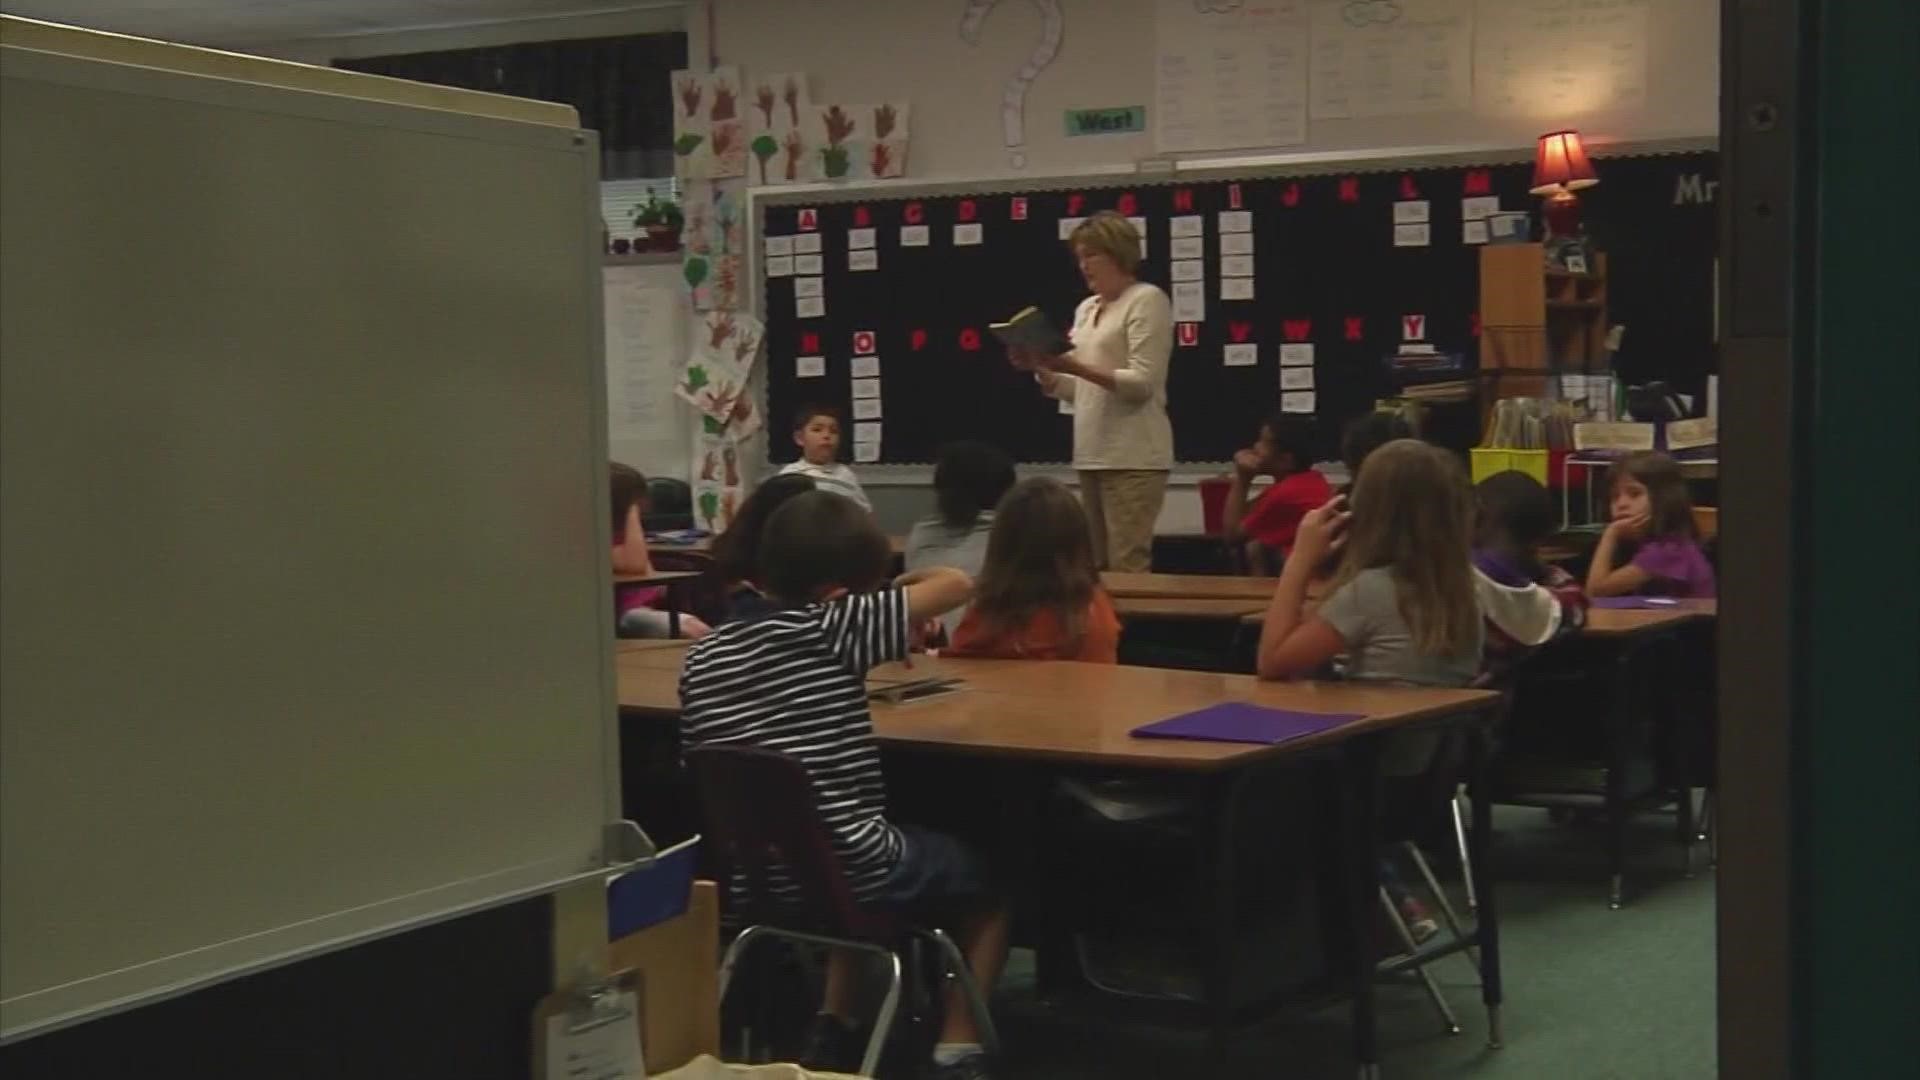 School districts around Central Texas continue to add additional safety measures as students and teachers prepare to return for a new school year.